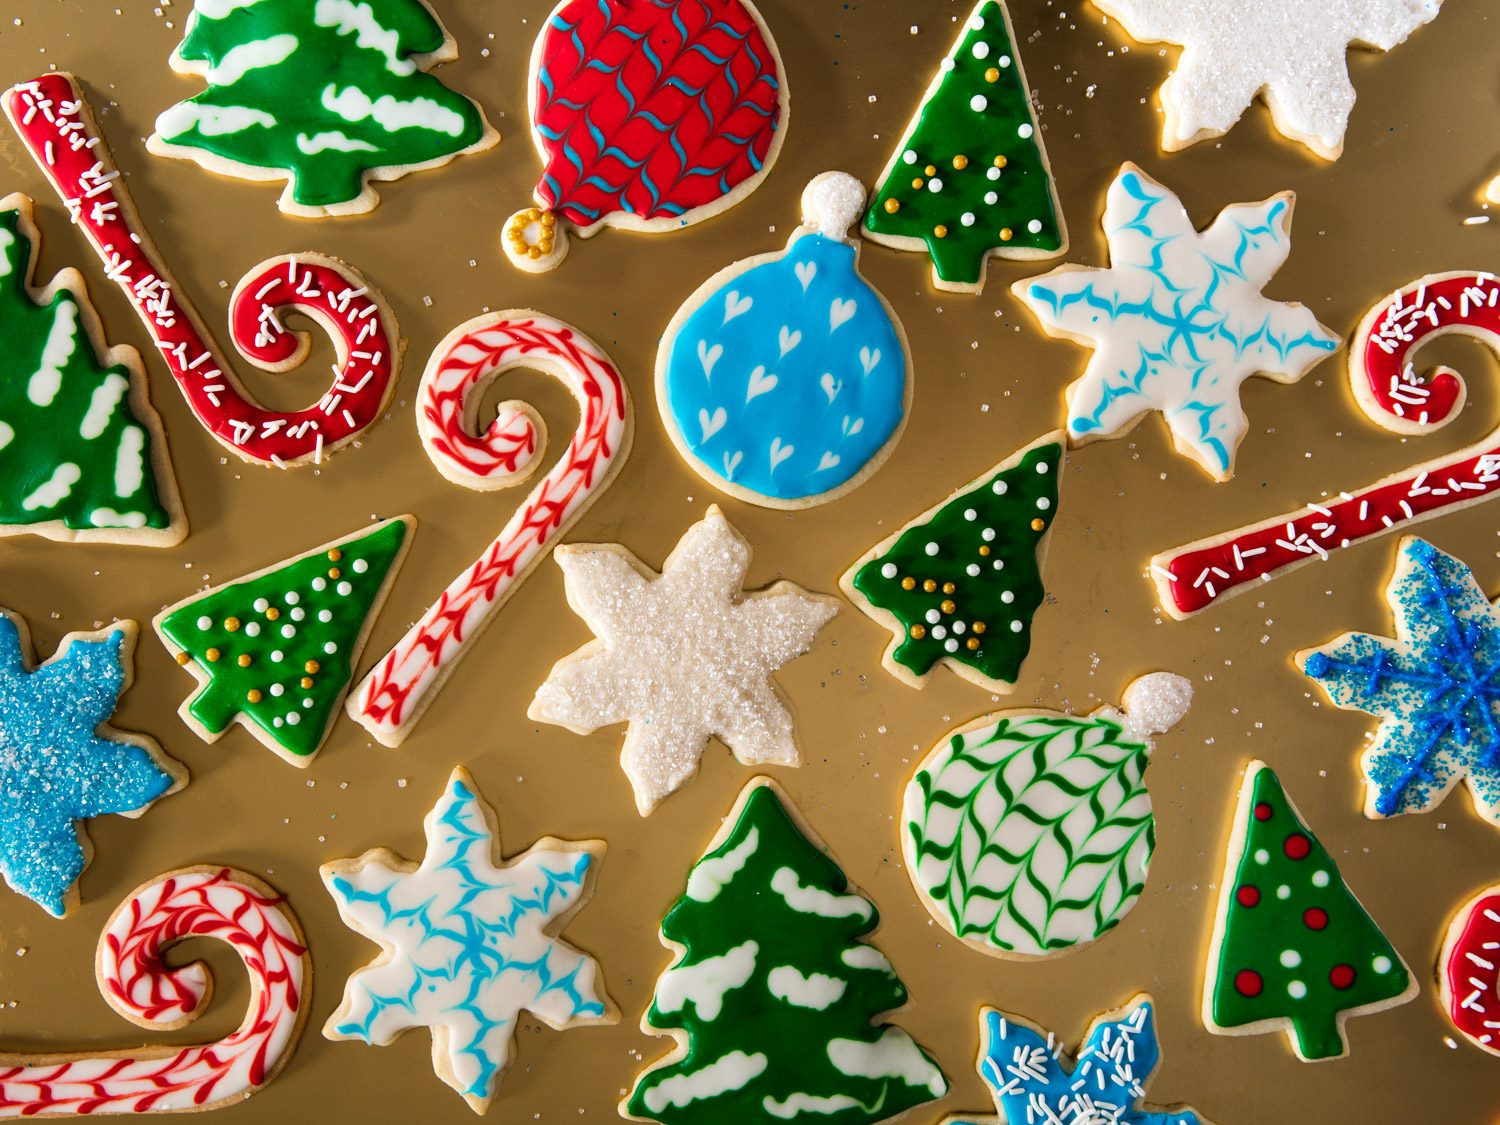 Decorated Christmas Cookies
 A Royal Icing Tutorial Decorate Christmas Cookies Like a